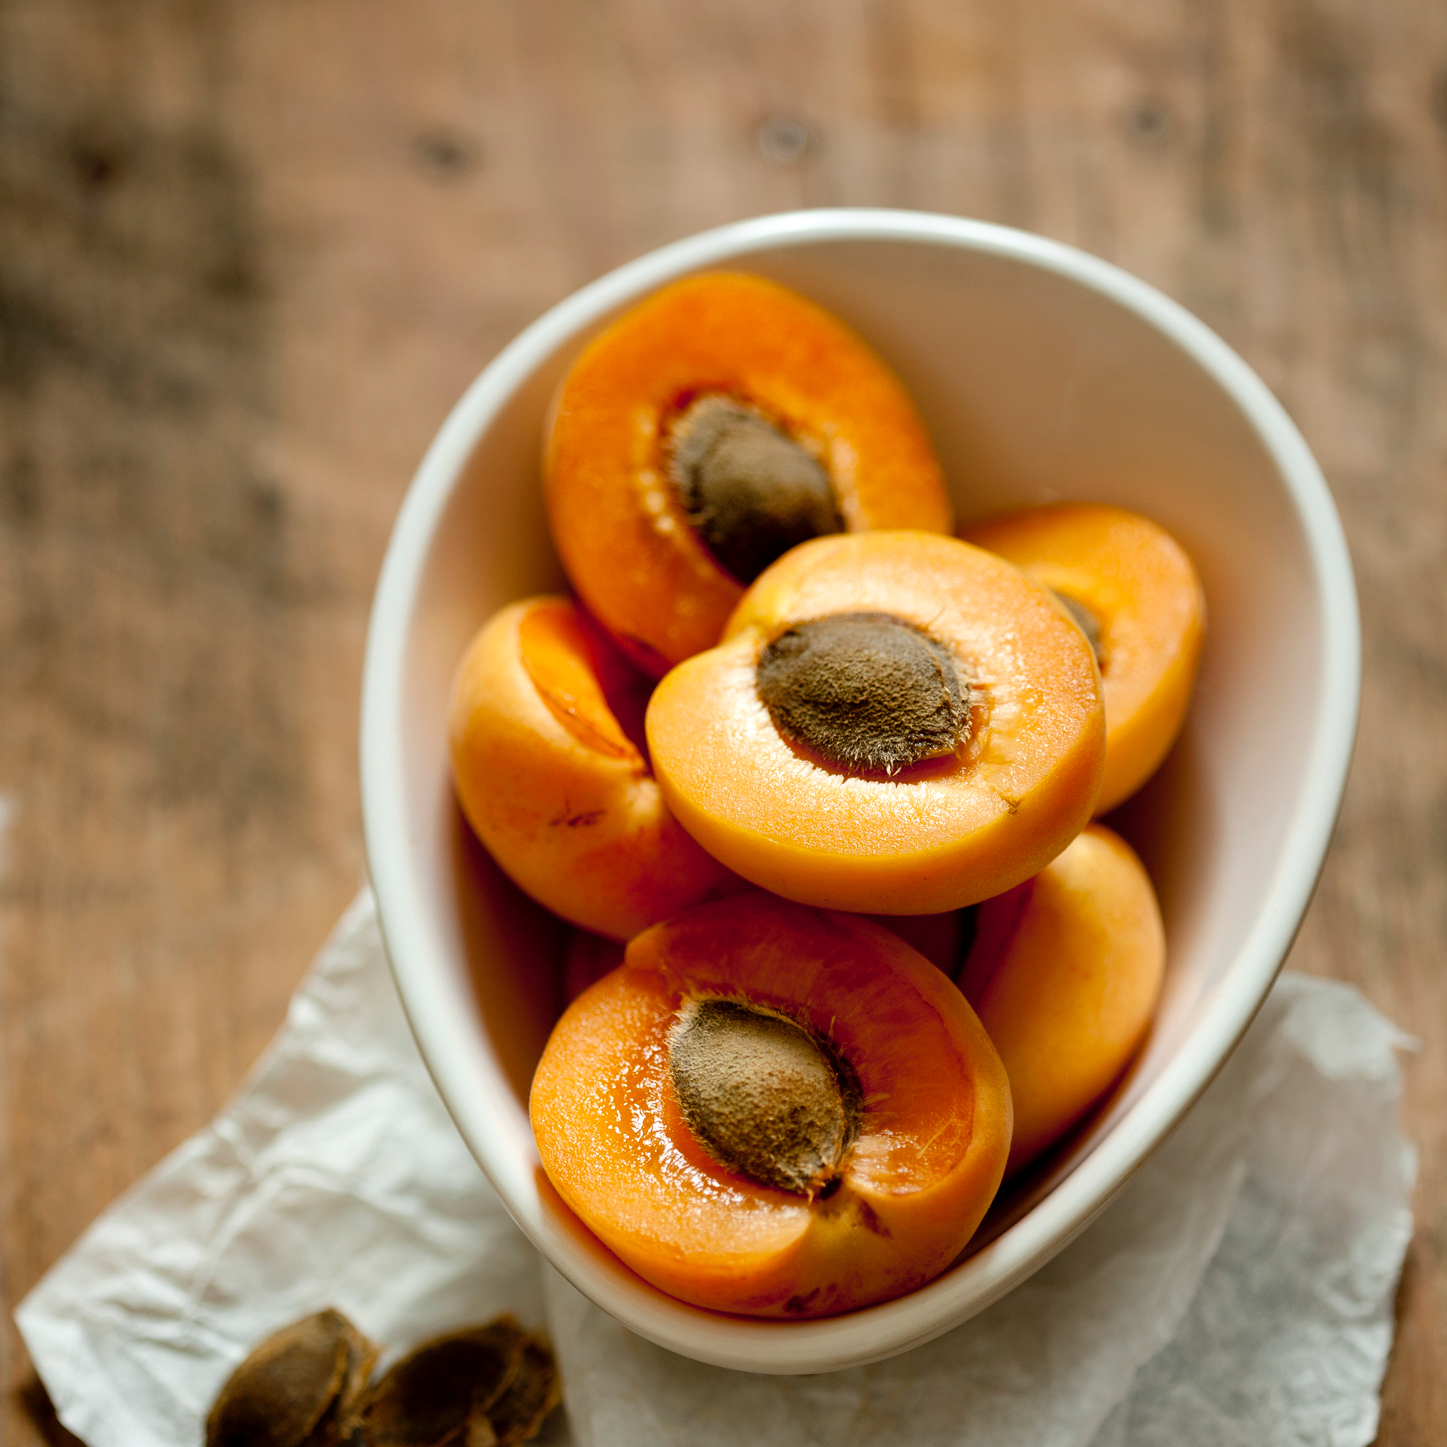 A bowl of halved apricots.